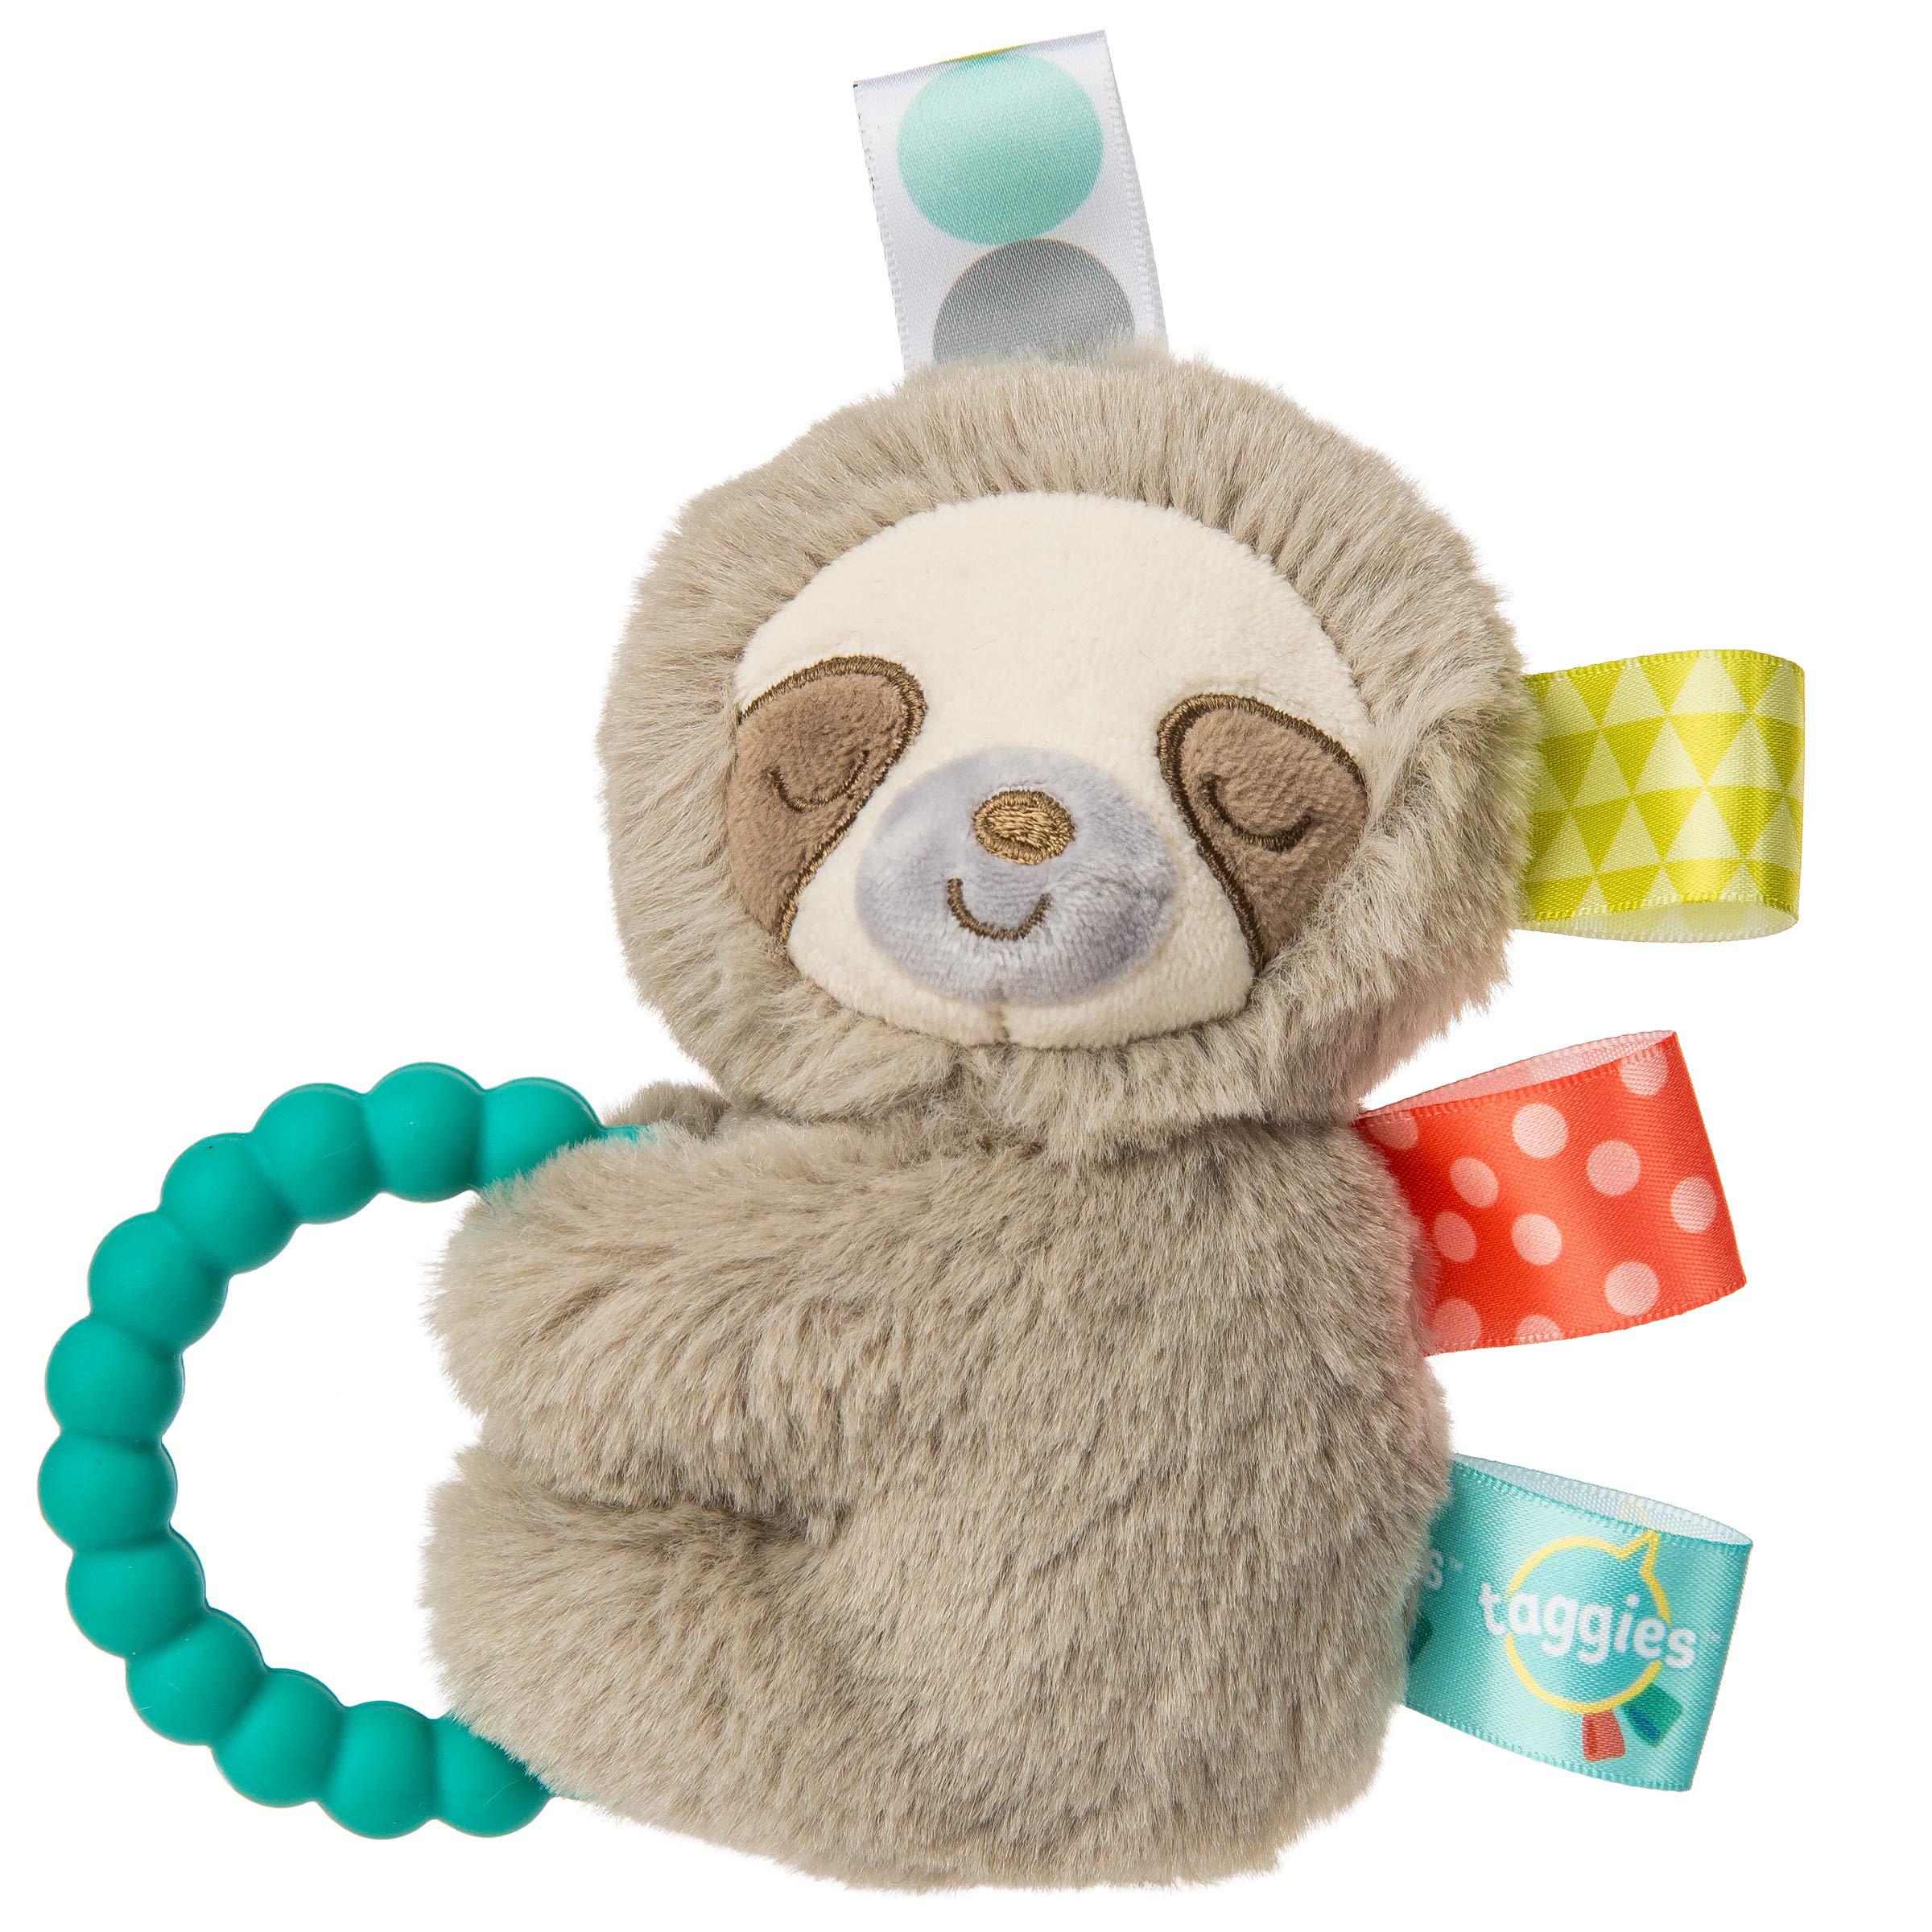 taggies sensory stuffed animal soft rattle with teether ring, molasses sloth